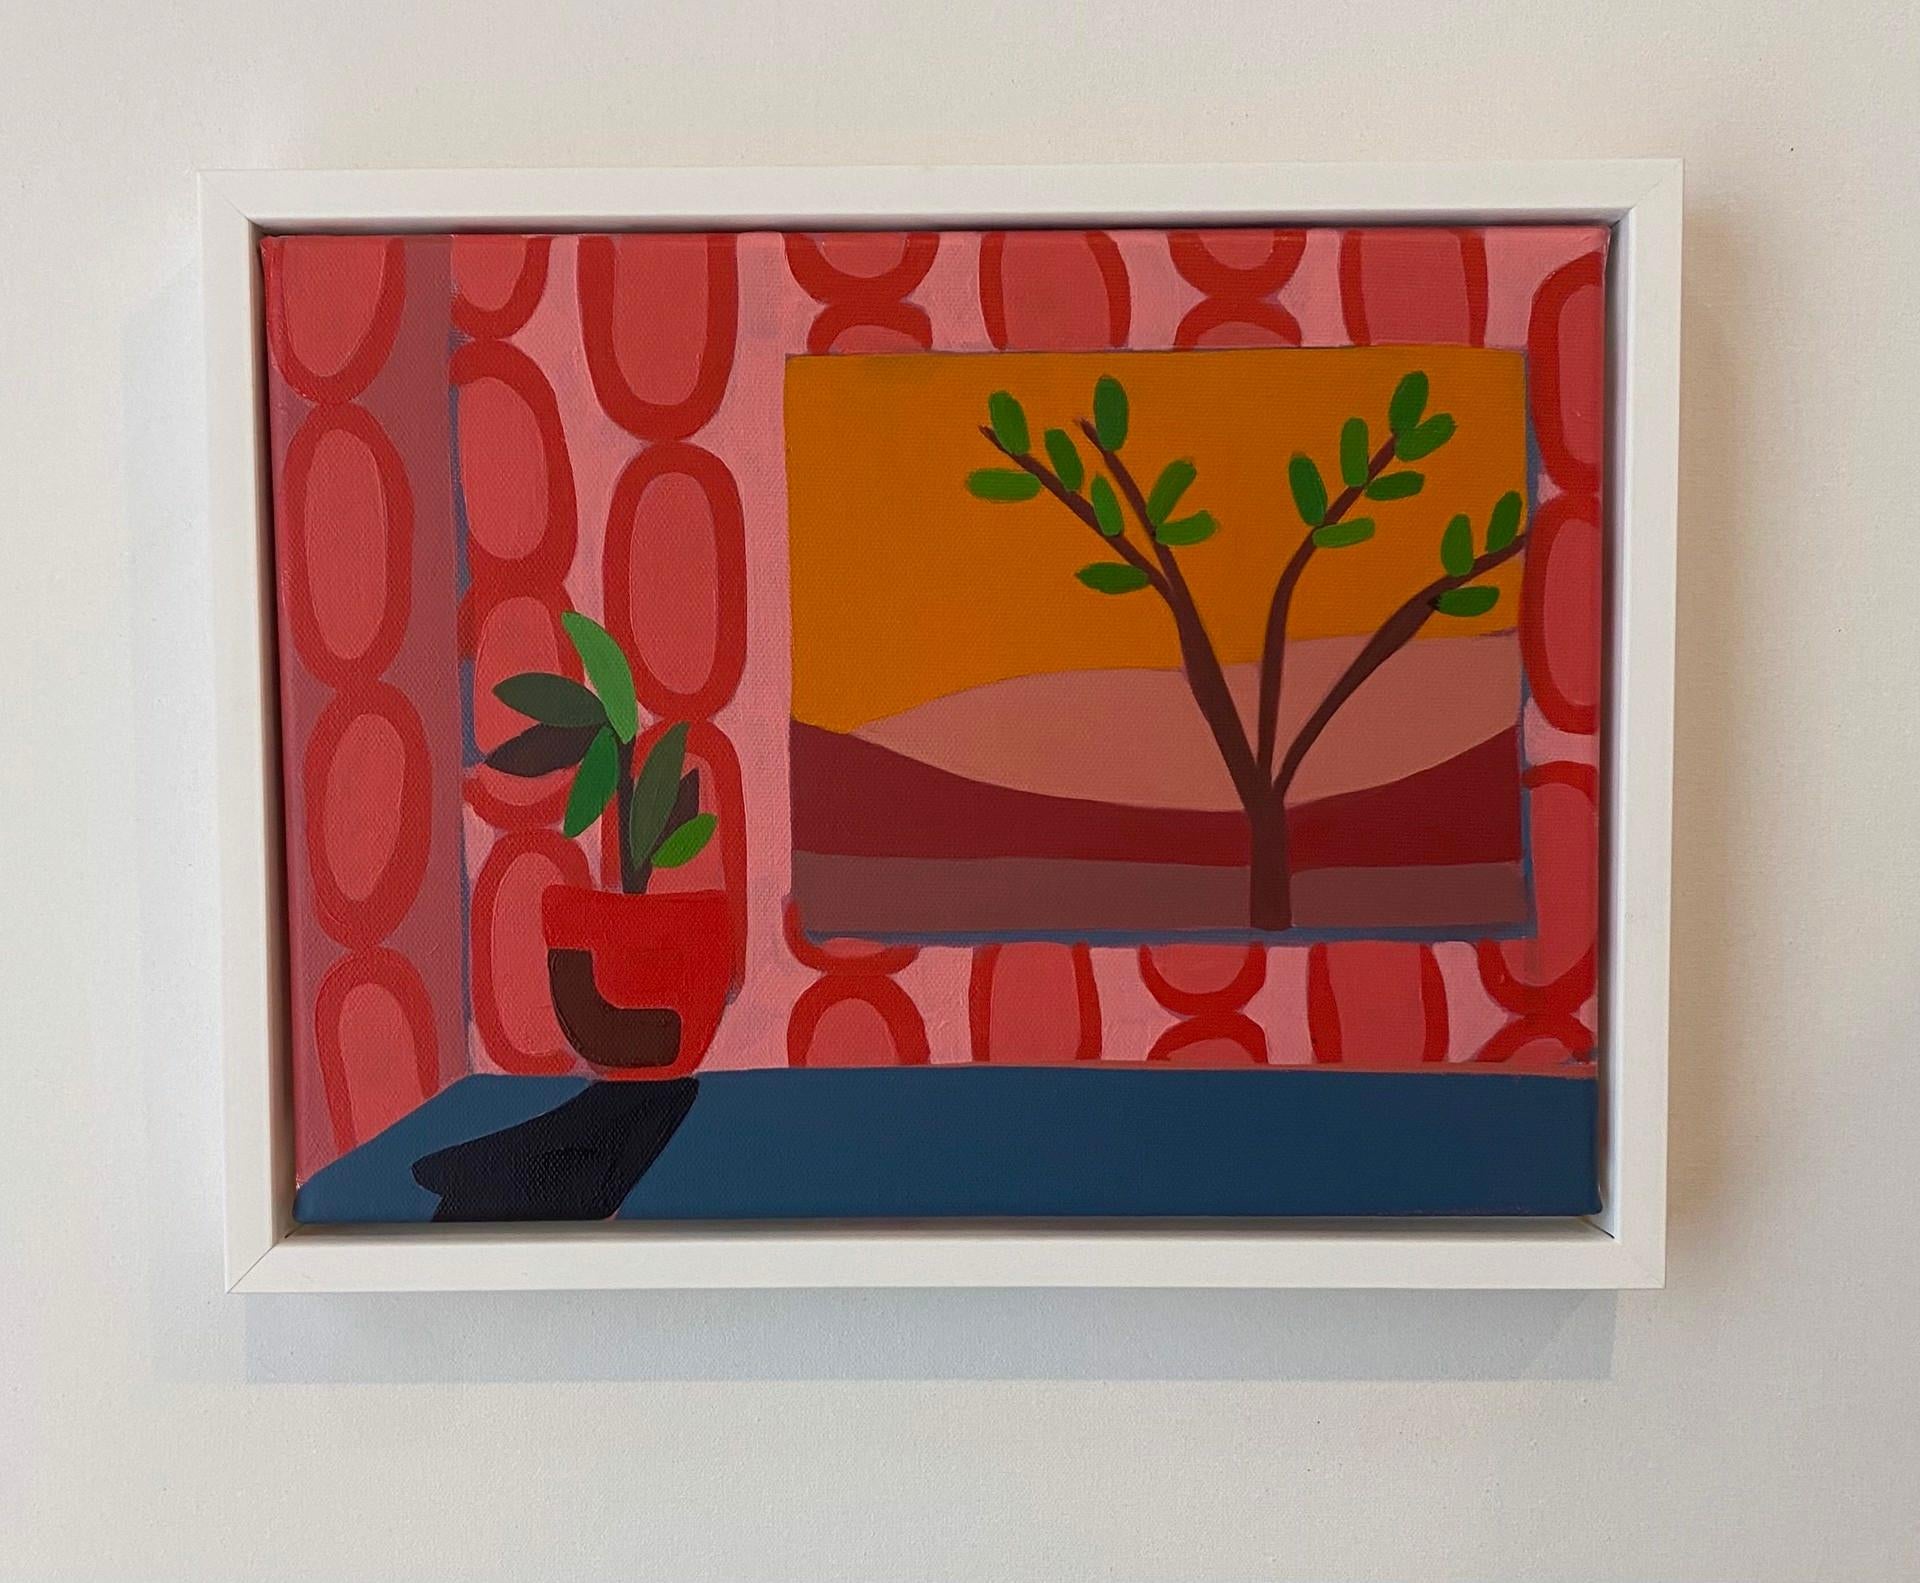 Pink and Red Room with Plant and Tree, 2021
Framed in a white floating frame.
